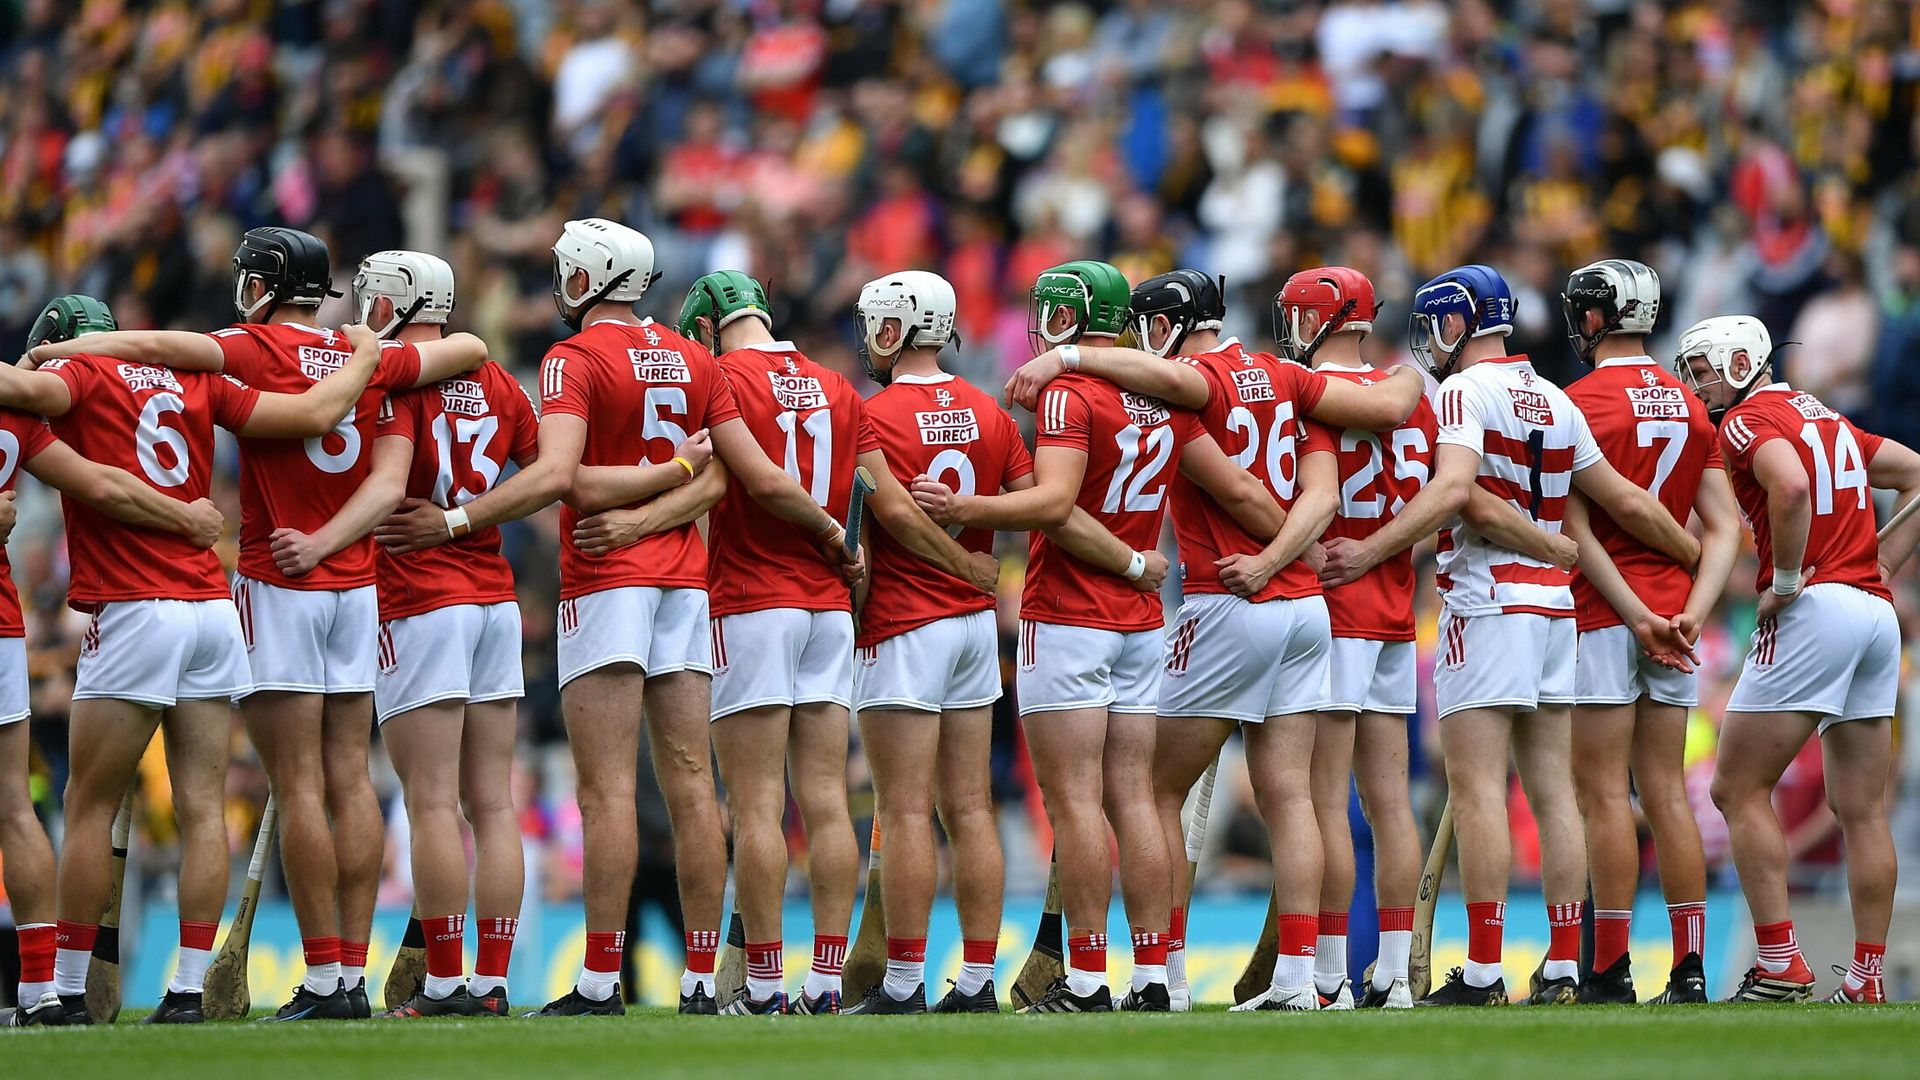 O'Connor: Starved of success, Cork are coming